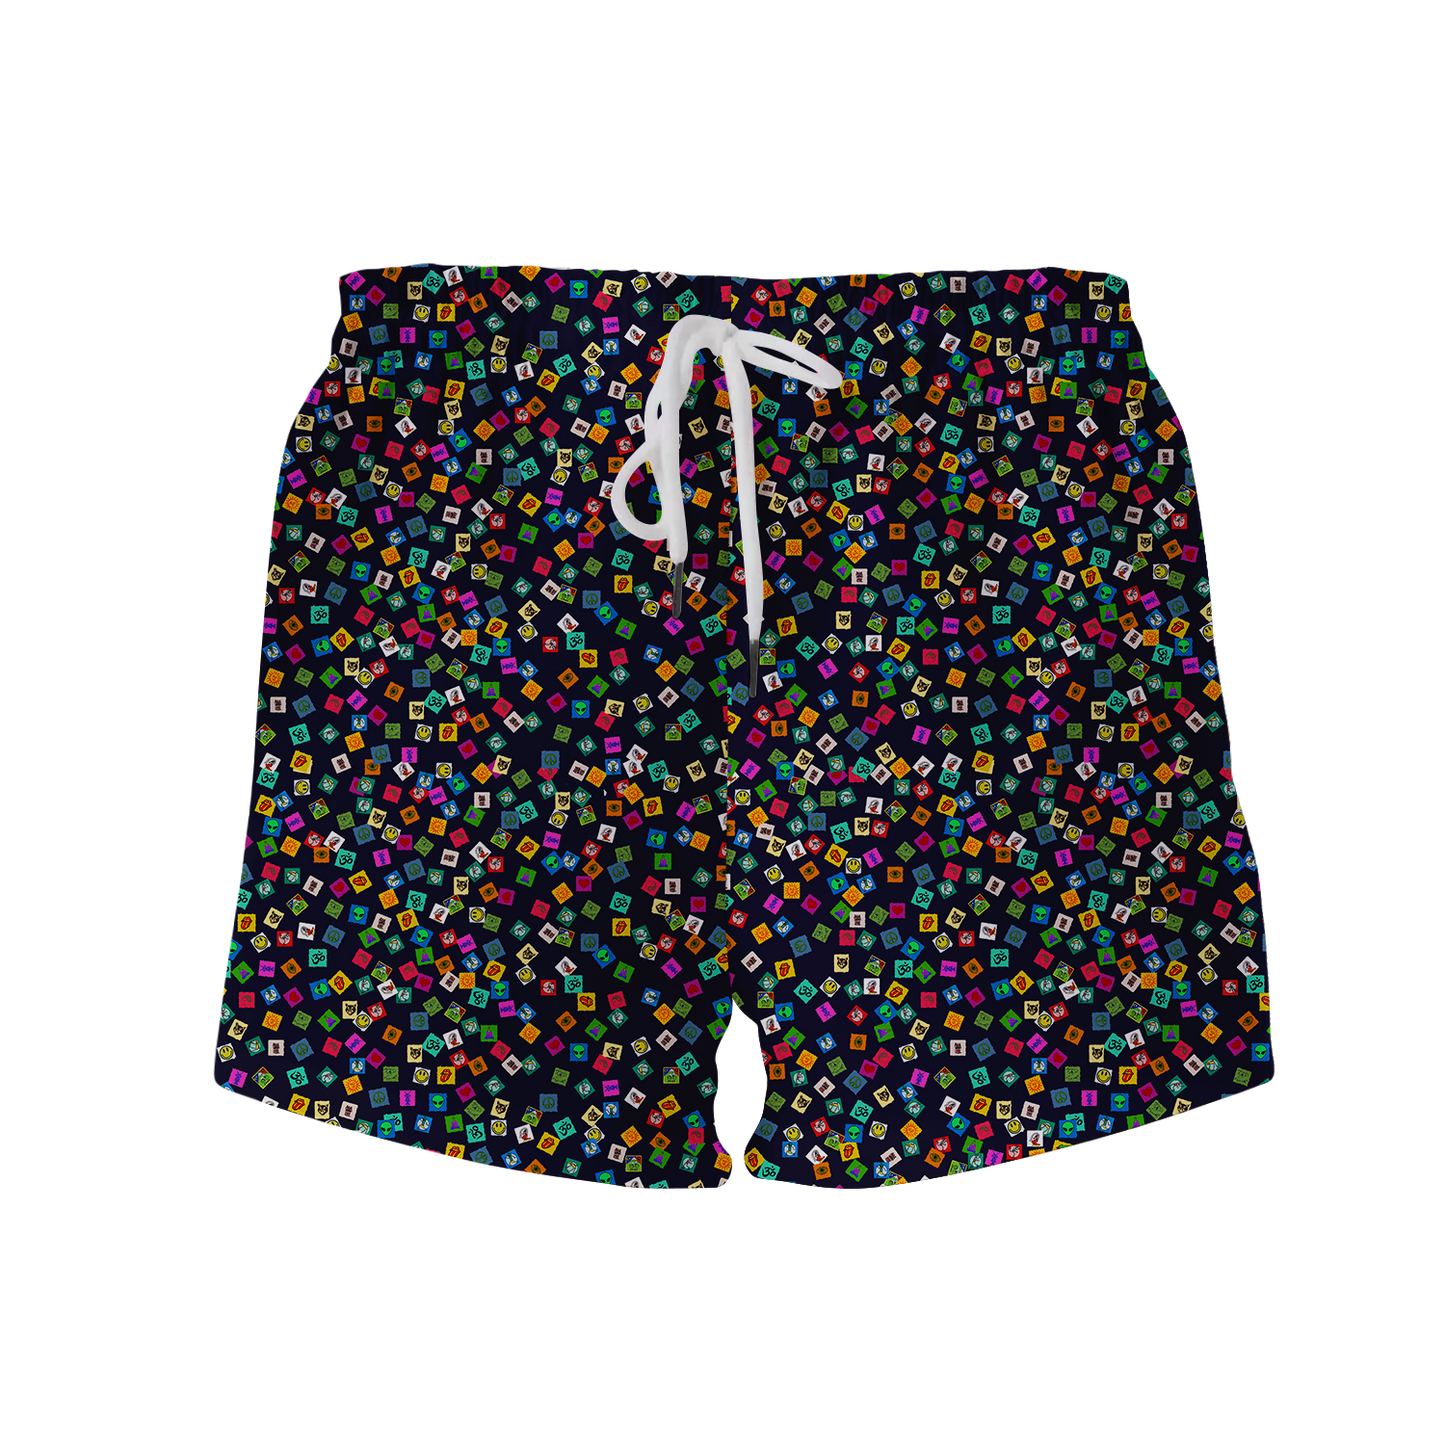 Tabs All Over Print Women's Shorts